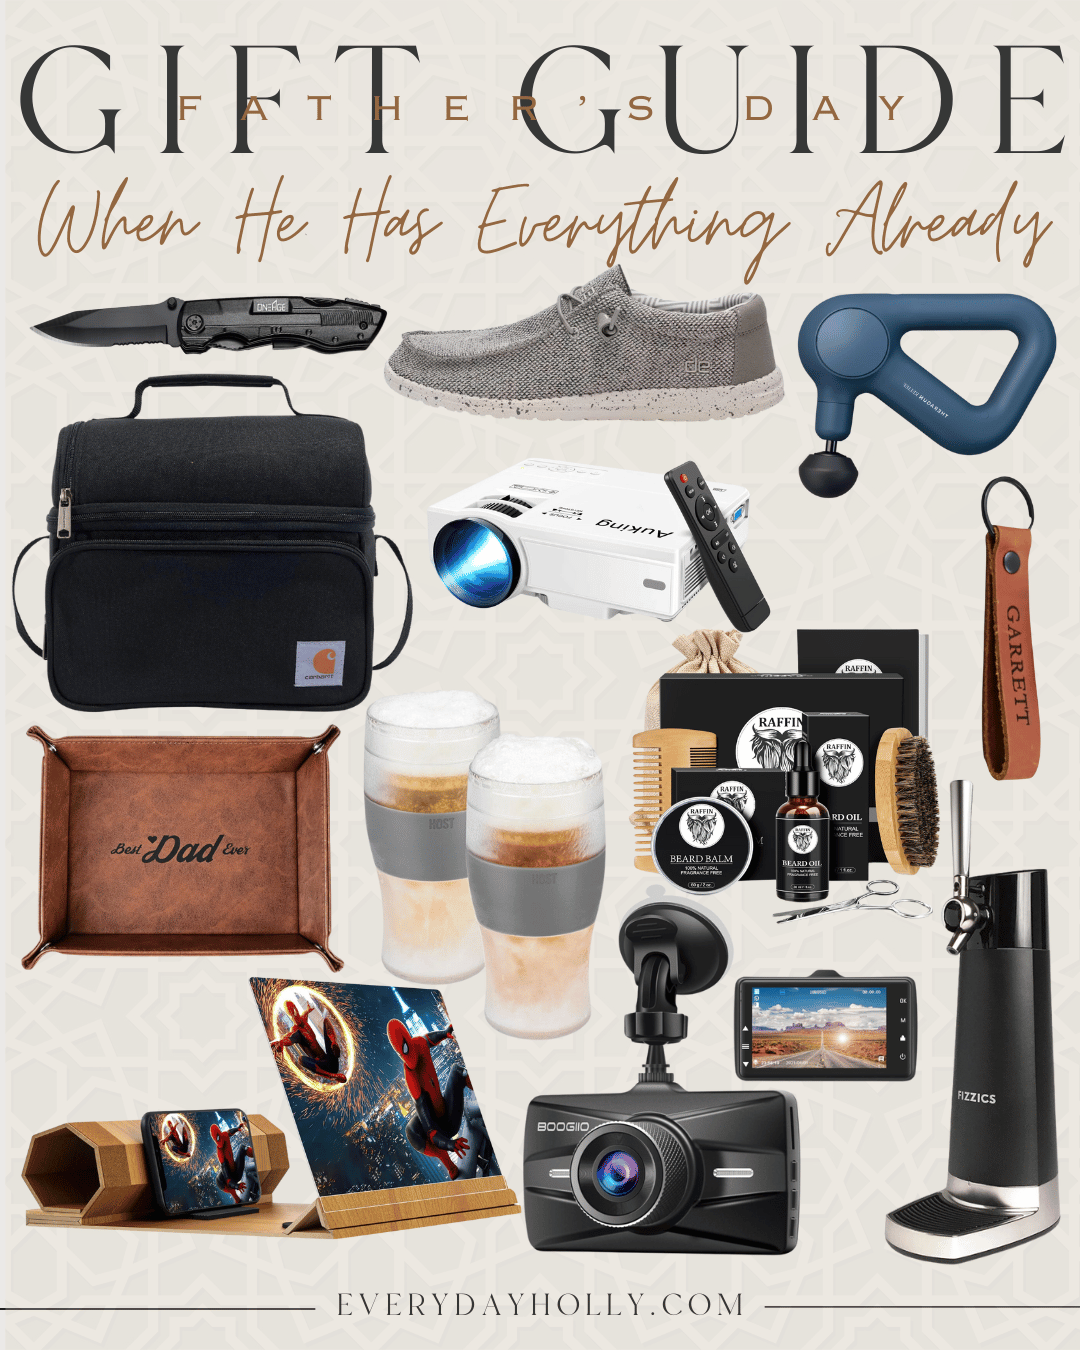 55 Gift Ideas your Dad will love this Father's Day | Father's Day, Father's day gift guide, gifts for dad, gifts for him, beard kit, massage gun, gadgets, tech finds, personalized gift, Amazon